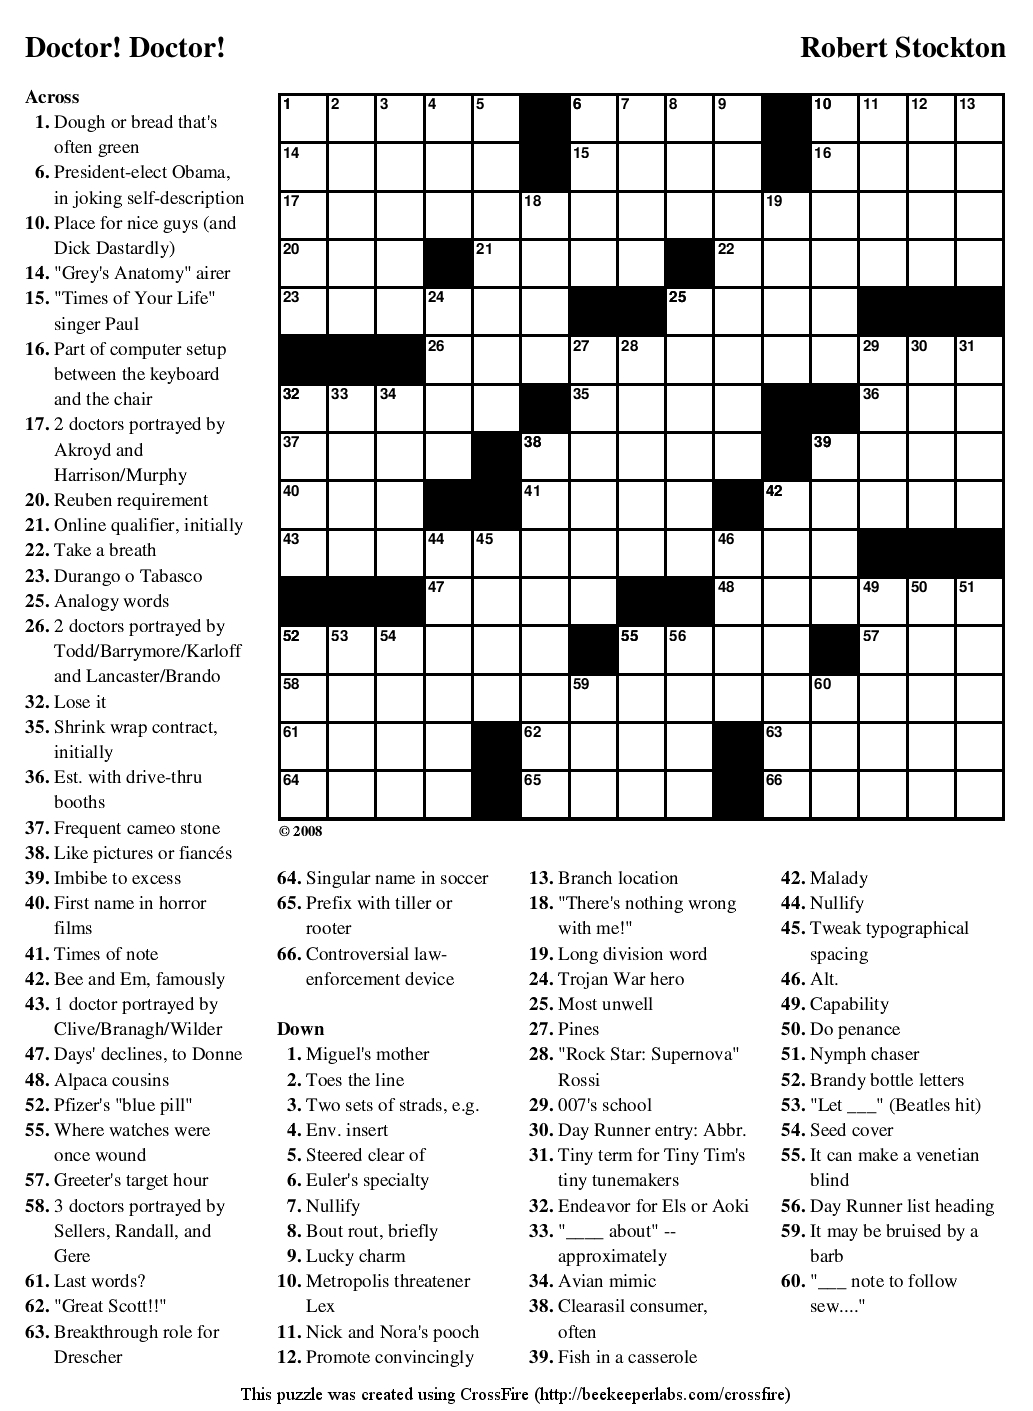 Crossword Puzzles Printable - Yahoo Image Search Results | Crossword - Printable Newspaper Crossword Puzzles For Free